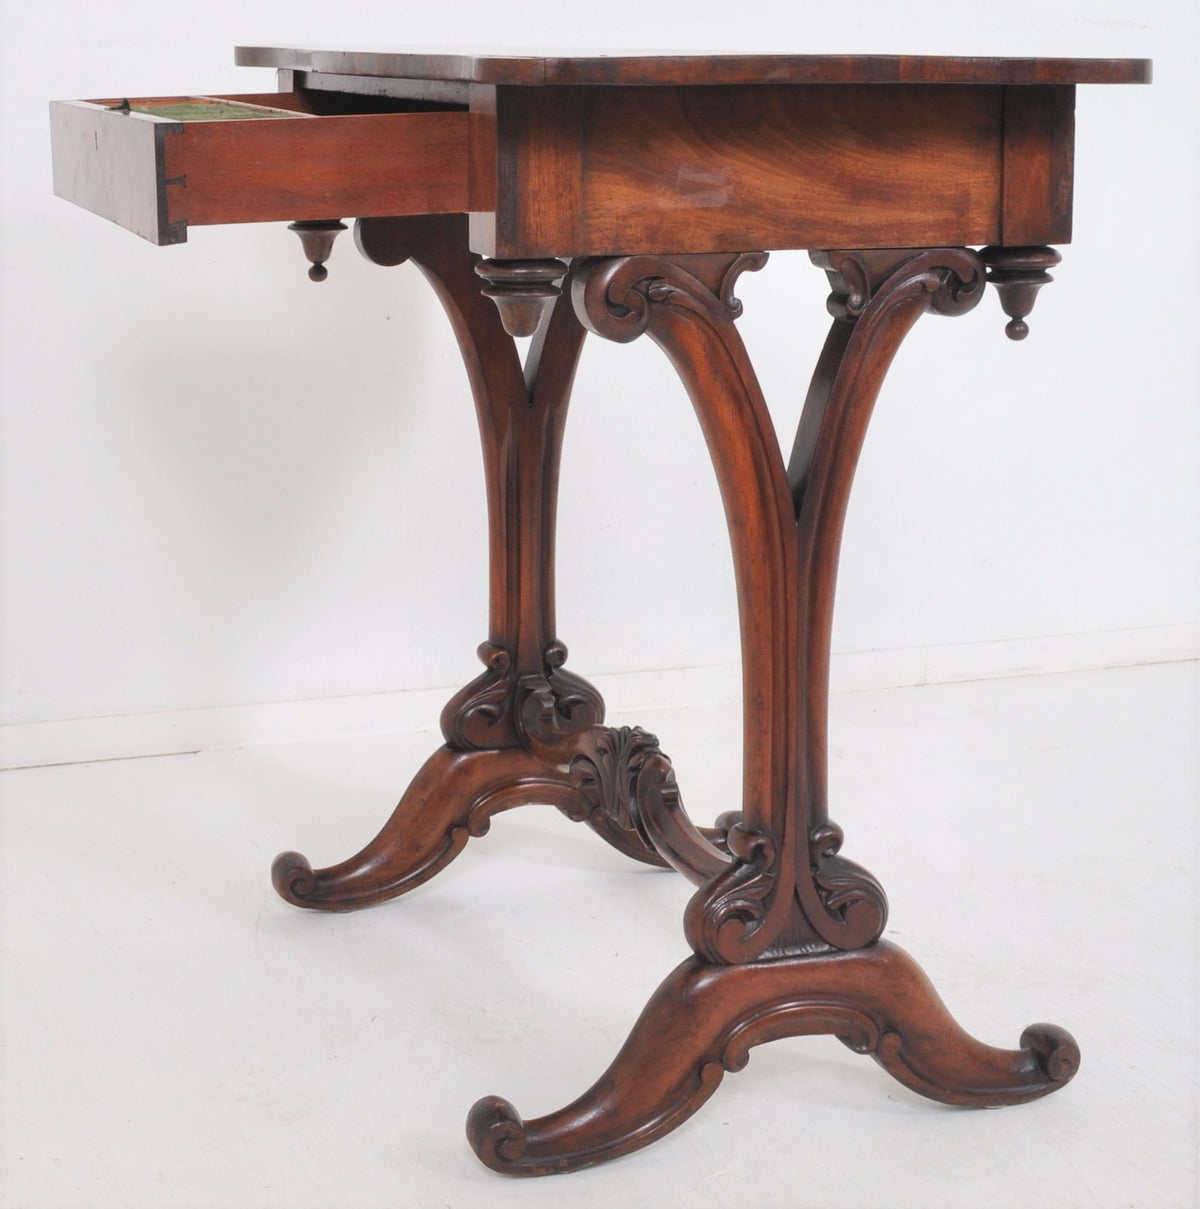 Antique Victorian Walnut Sewing Table, Circa 1850